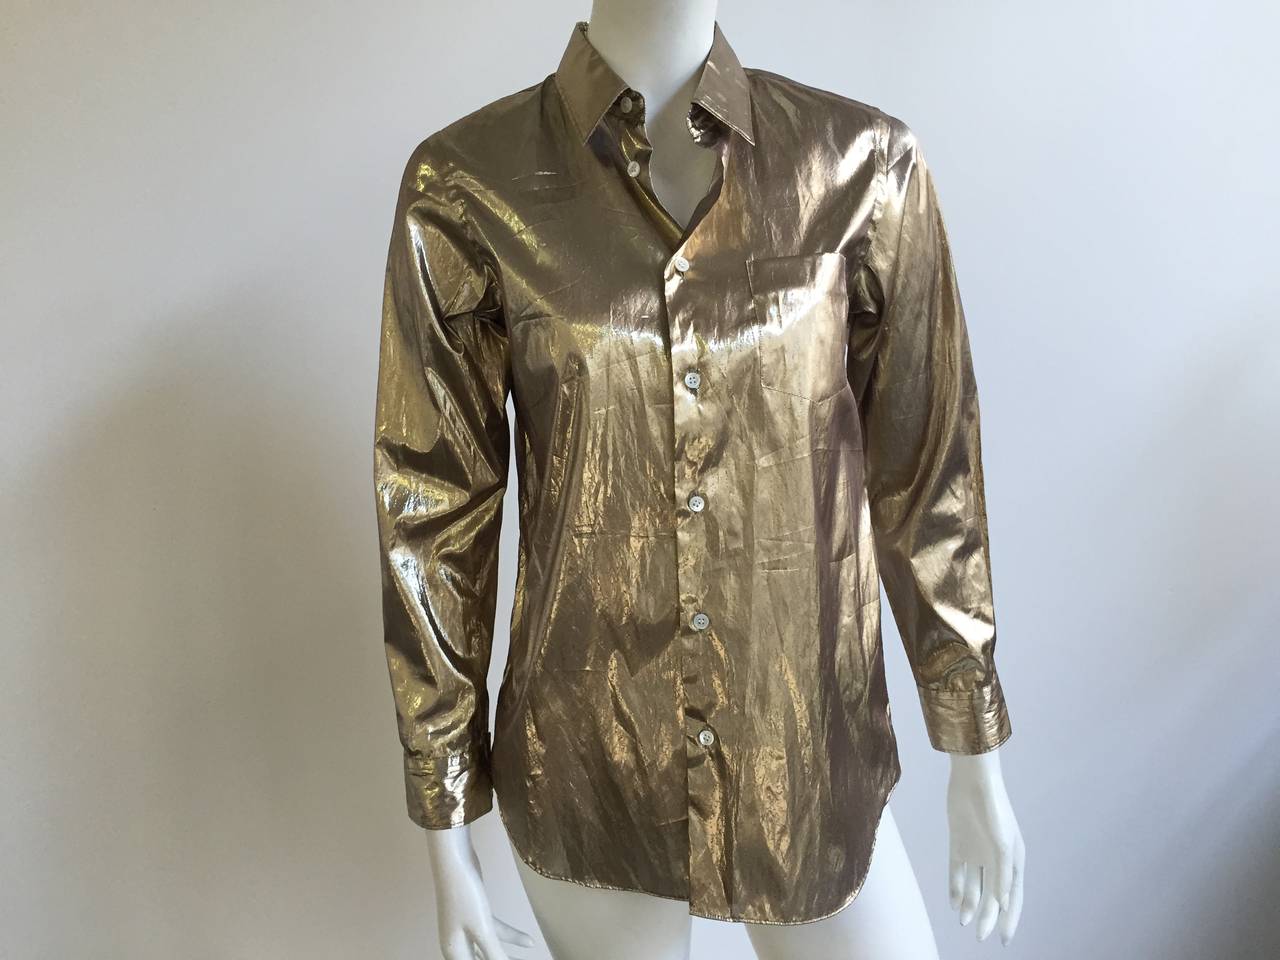 Junya Watanabe for Comme des Garçons gold lame blouse size medium is made in Japan. 
Measurements are:
36